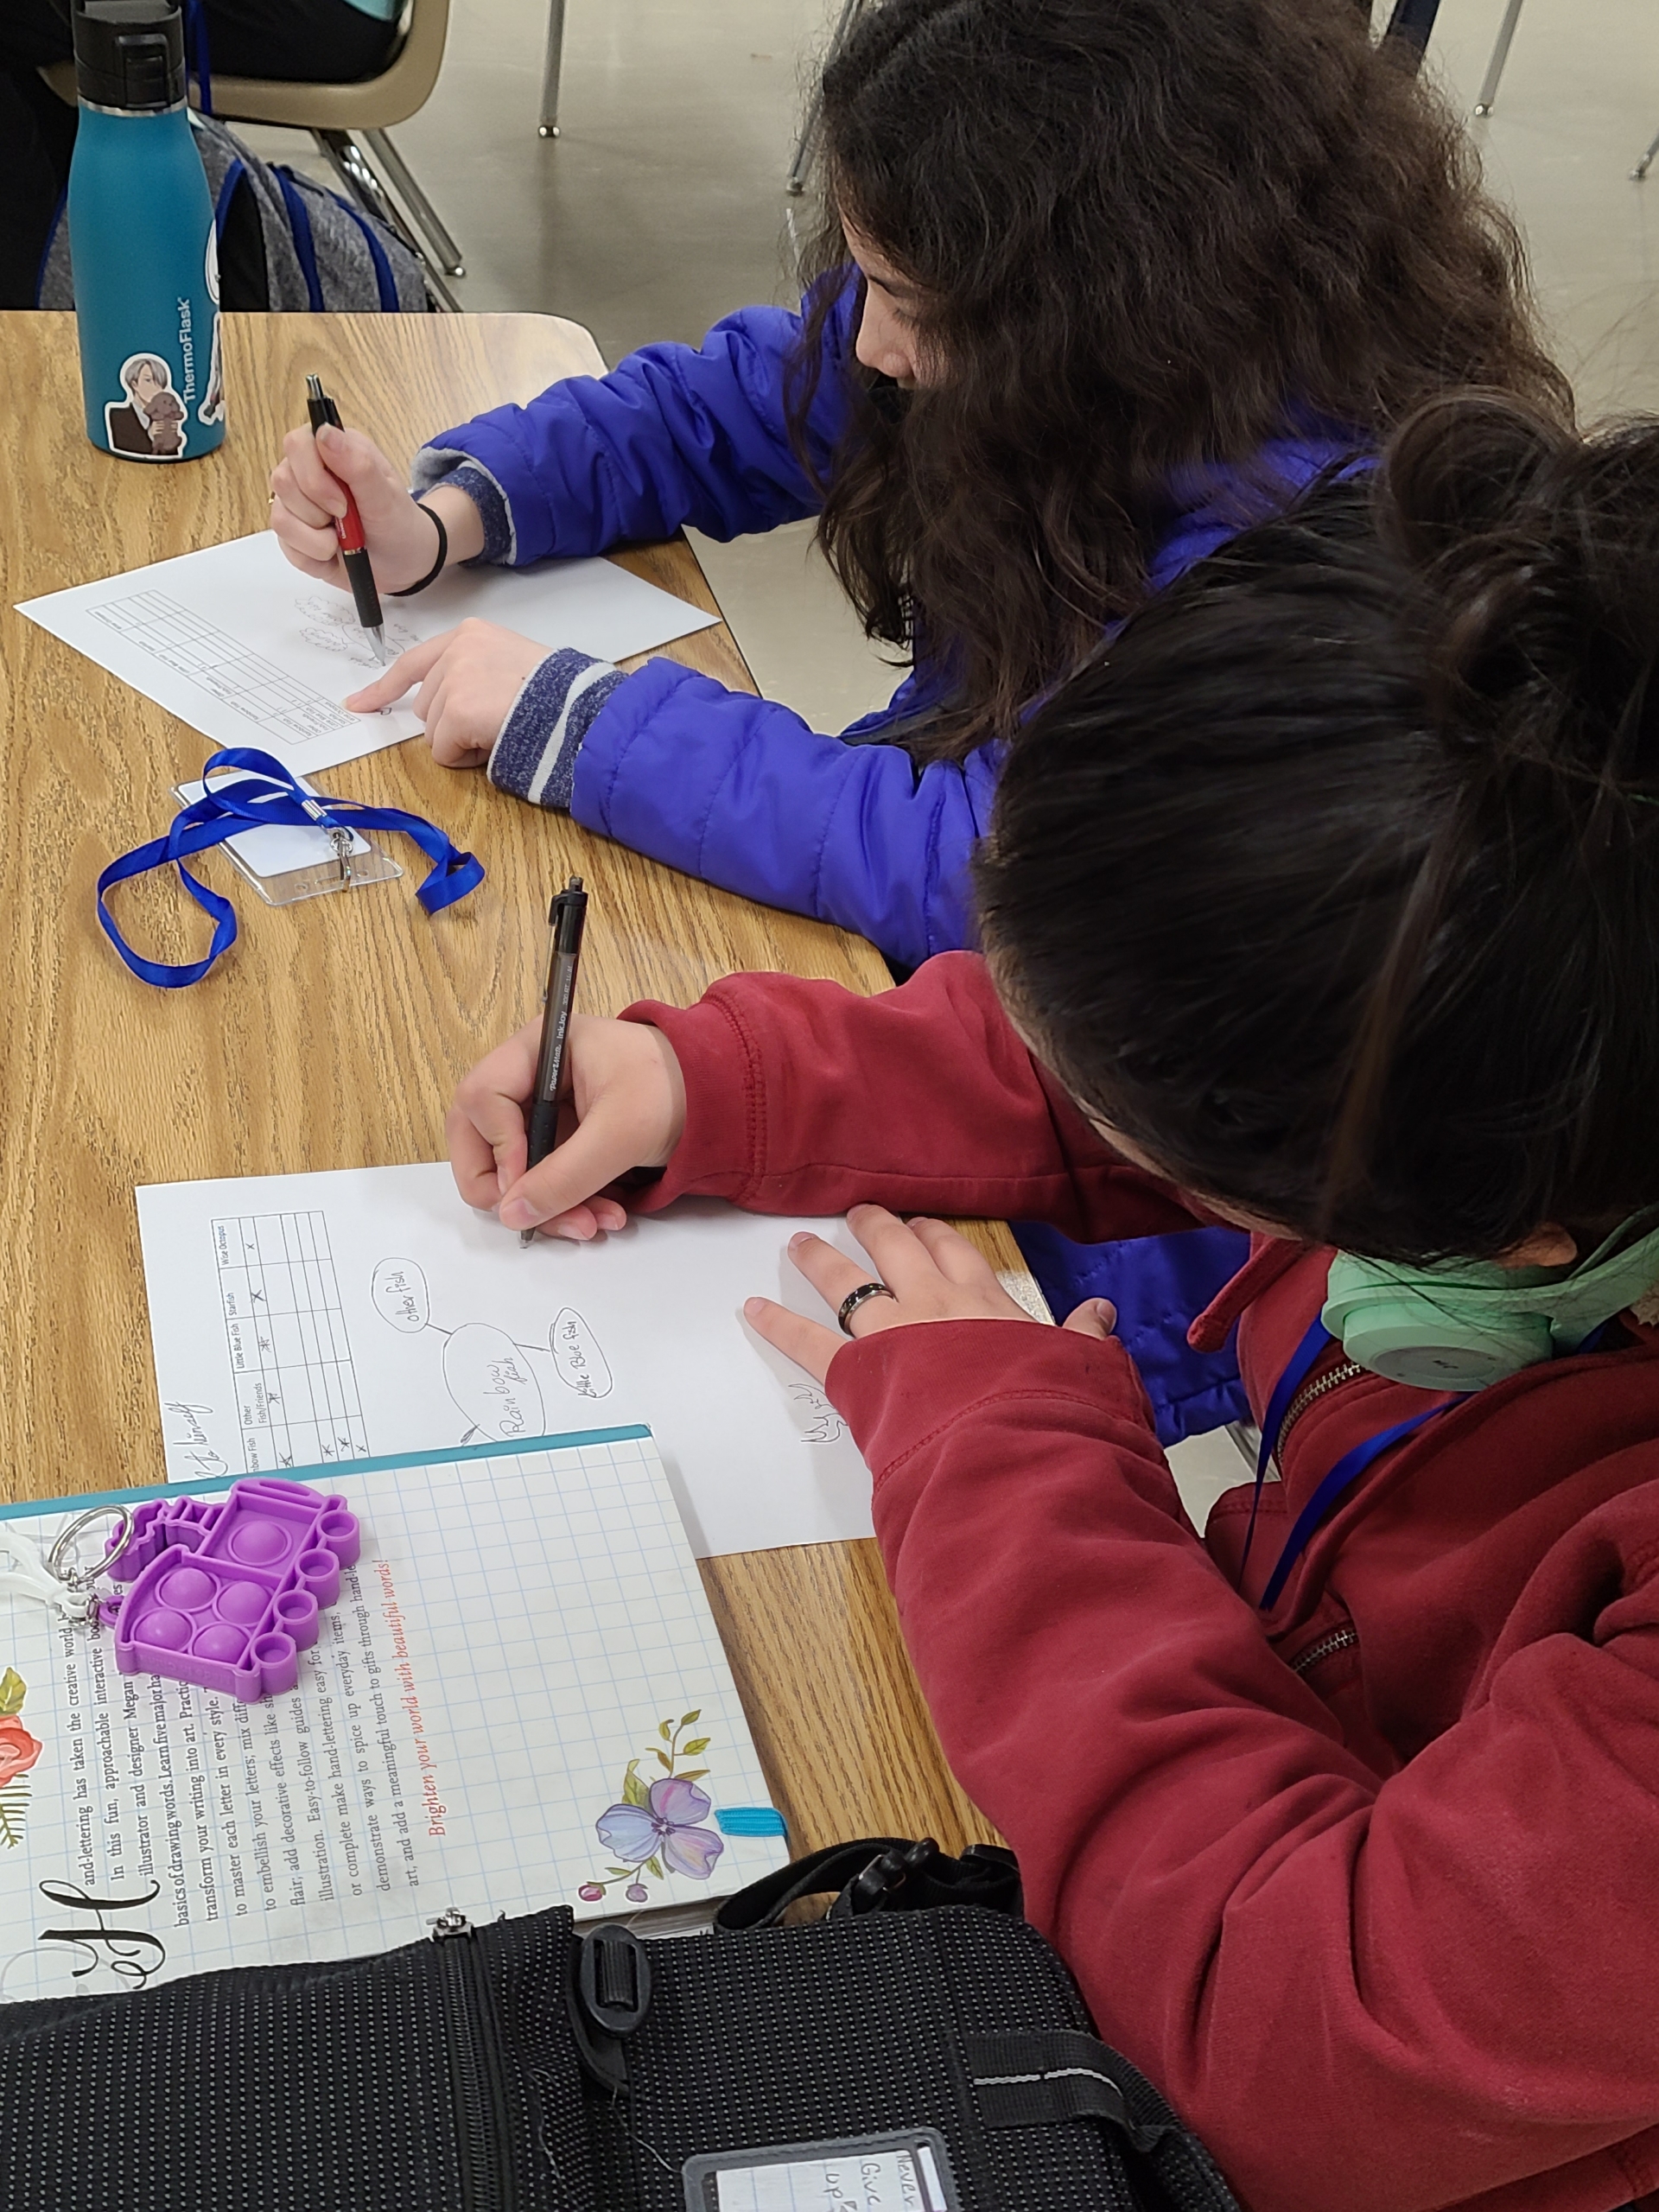 Two middle-school youth, one wearing purple and one wearing red, draw network maps on pieces of white paper.